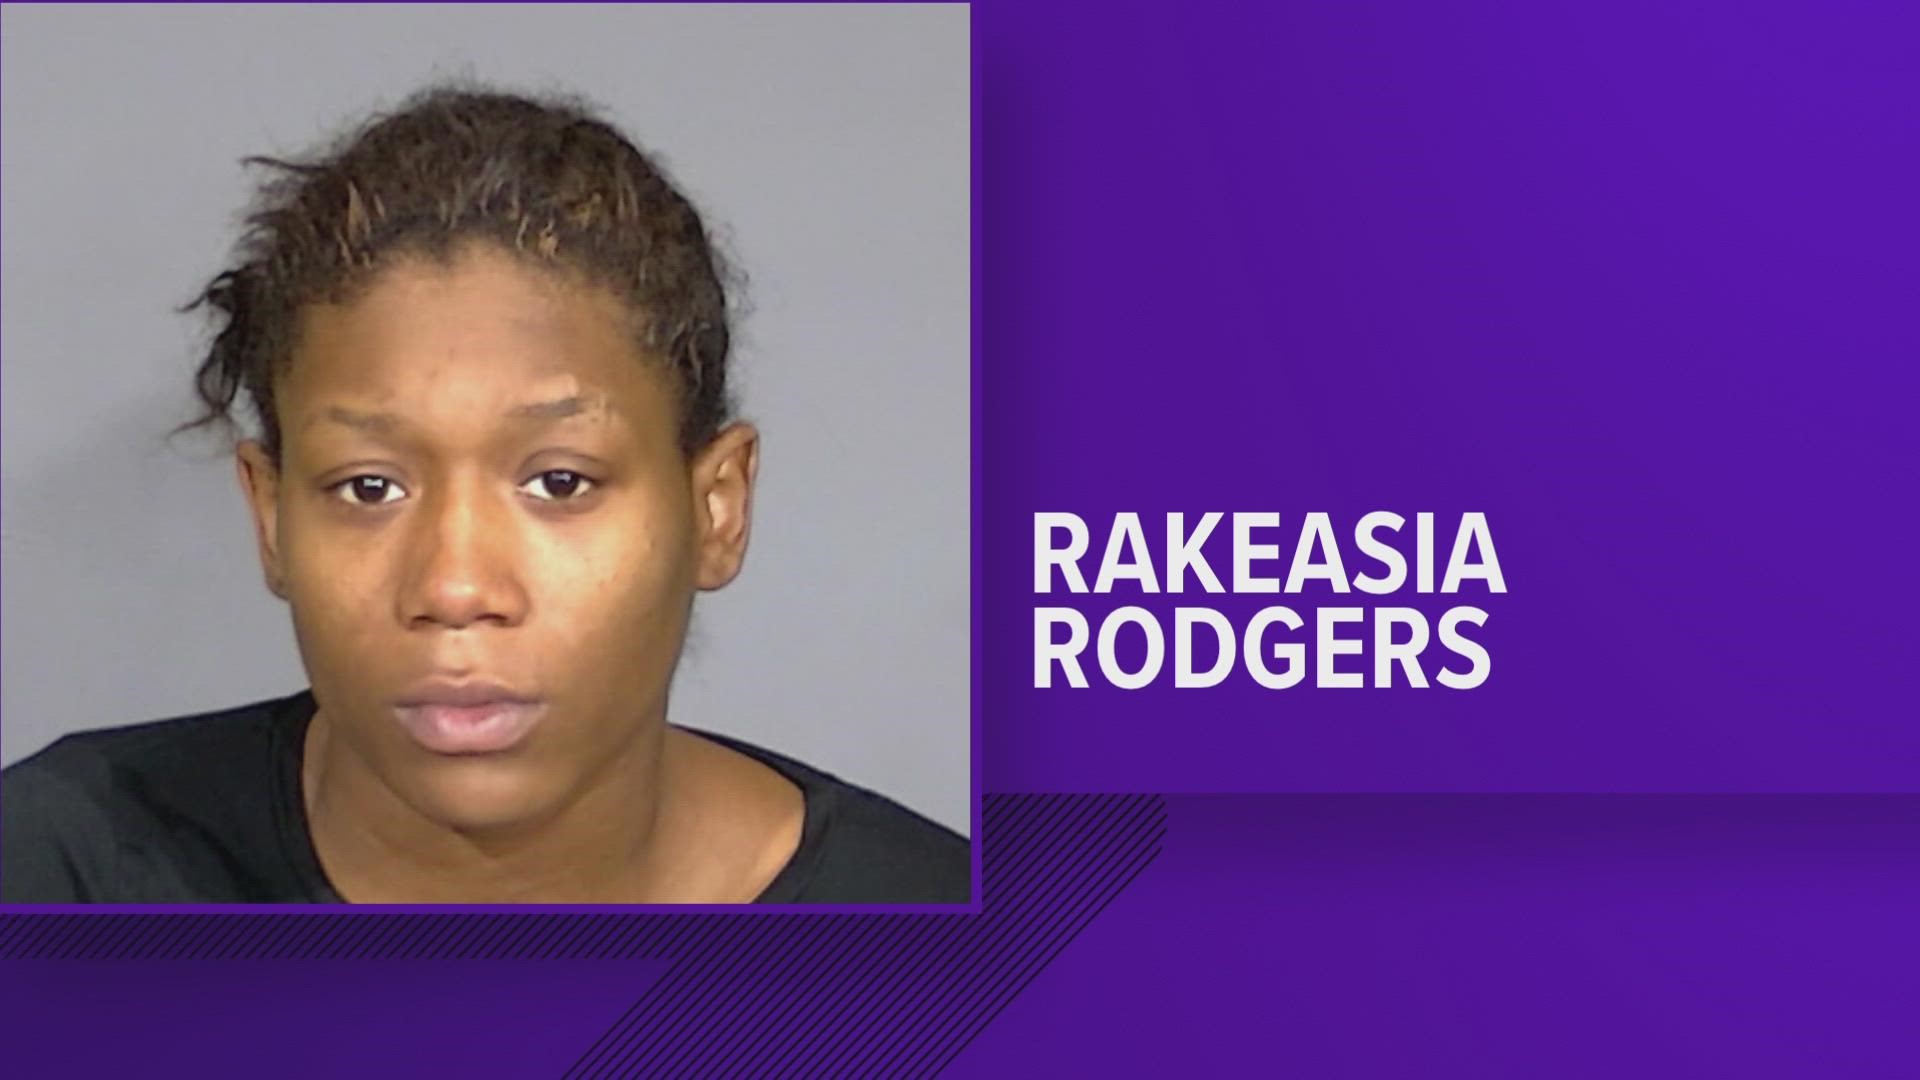 Rakeasia Rodgers appeared before a judge for the first time today. The judge set her bail at $6,000 cash.